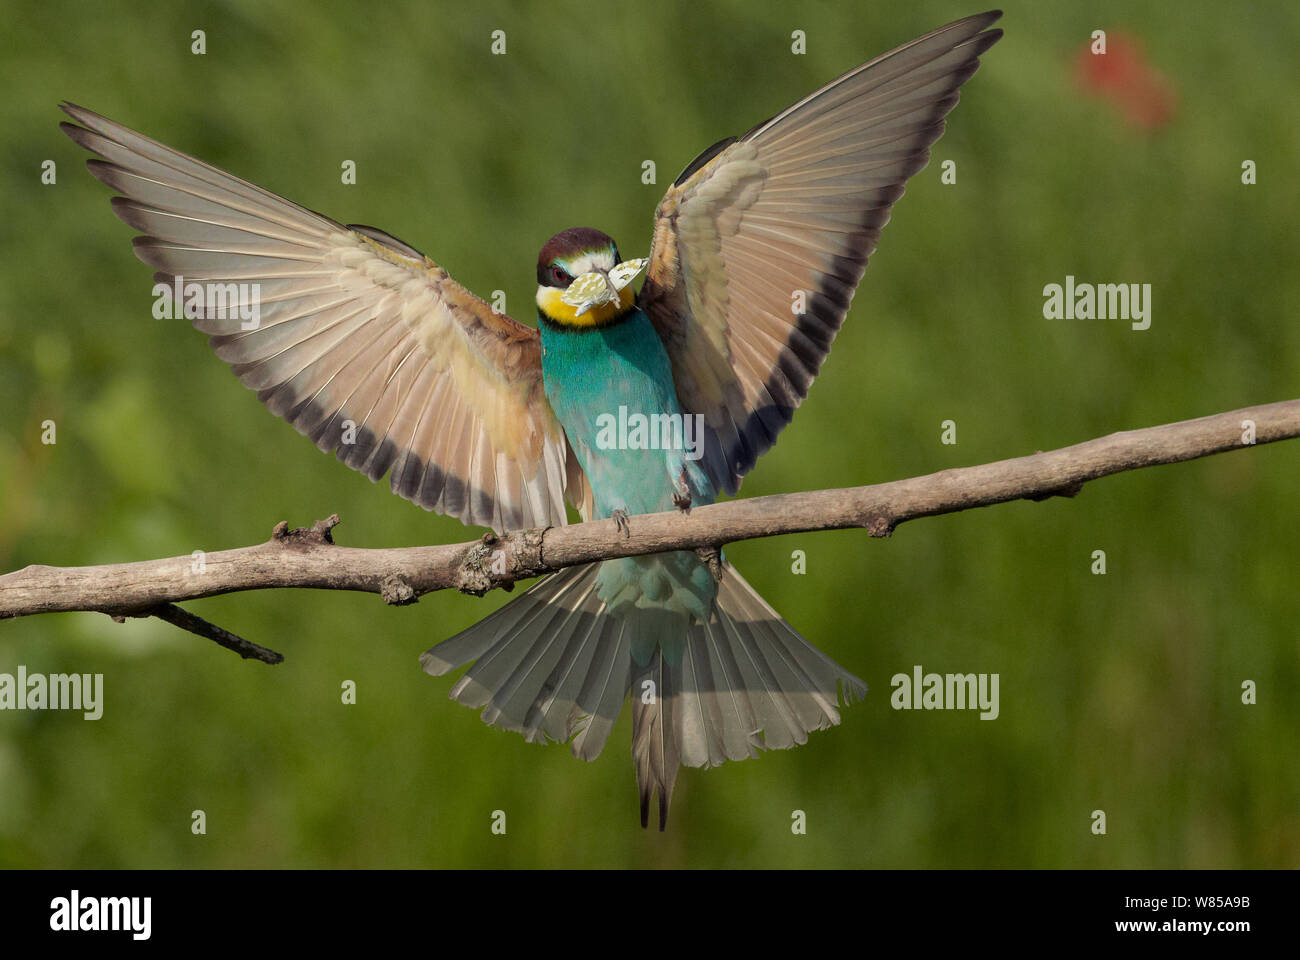 European bee-eater (Merops apiaster) landing on a branch with butterfly prey, Hungary, June. Stock Photo